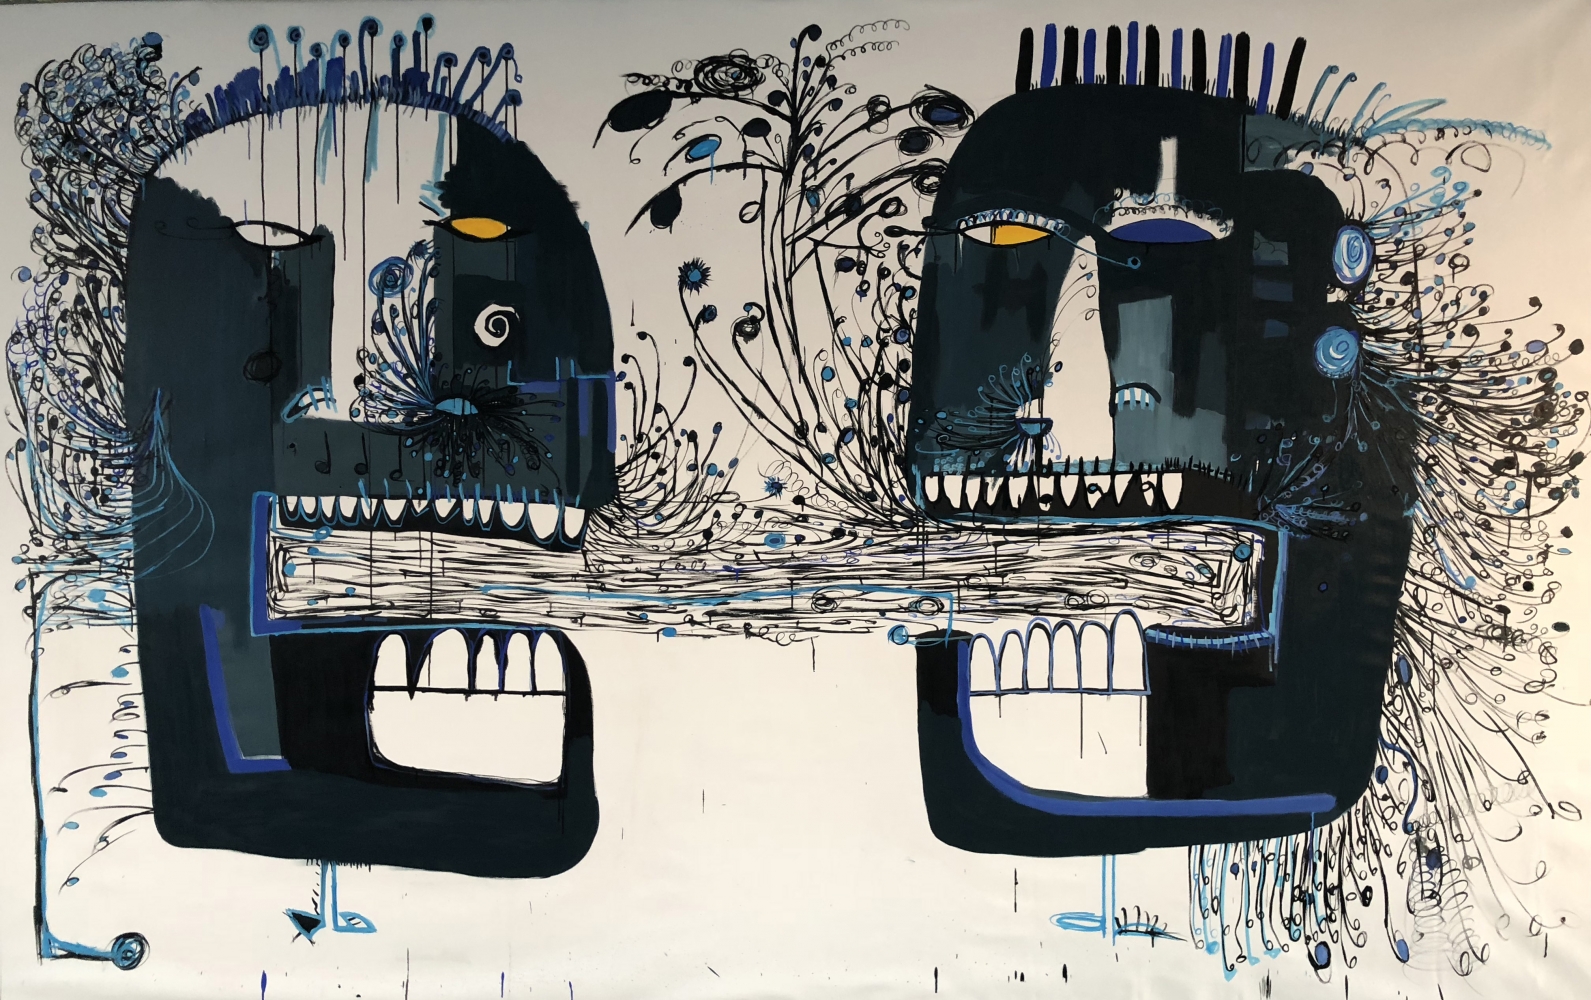 Fernanda Lavera, The Mind of Men II, 2018, Acrylic on canvas, 79 x 126 inches, Graffiti and Street Art for Sale at Manolis Projects Art Gallery, Miami, Fl